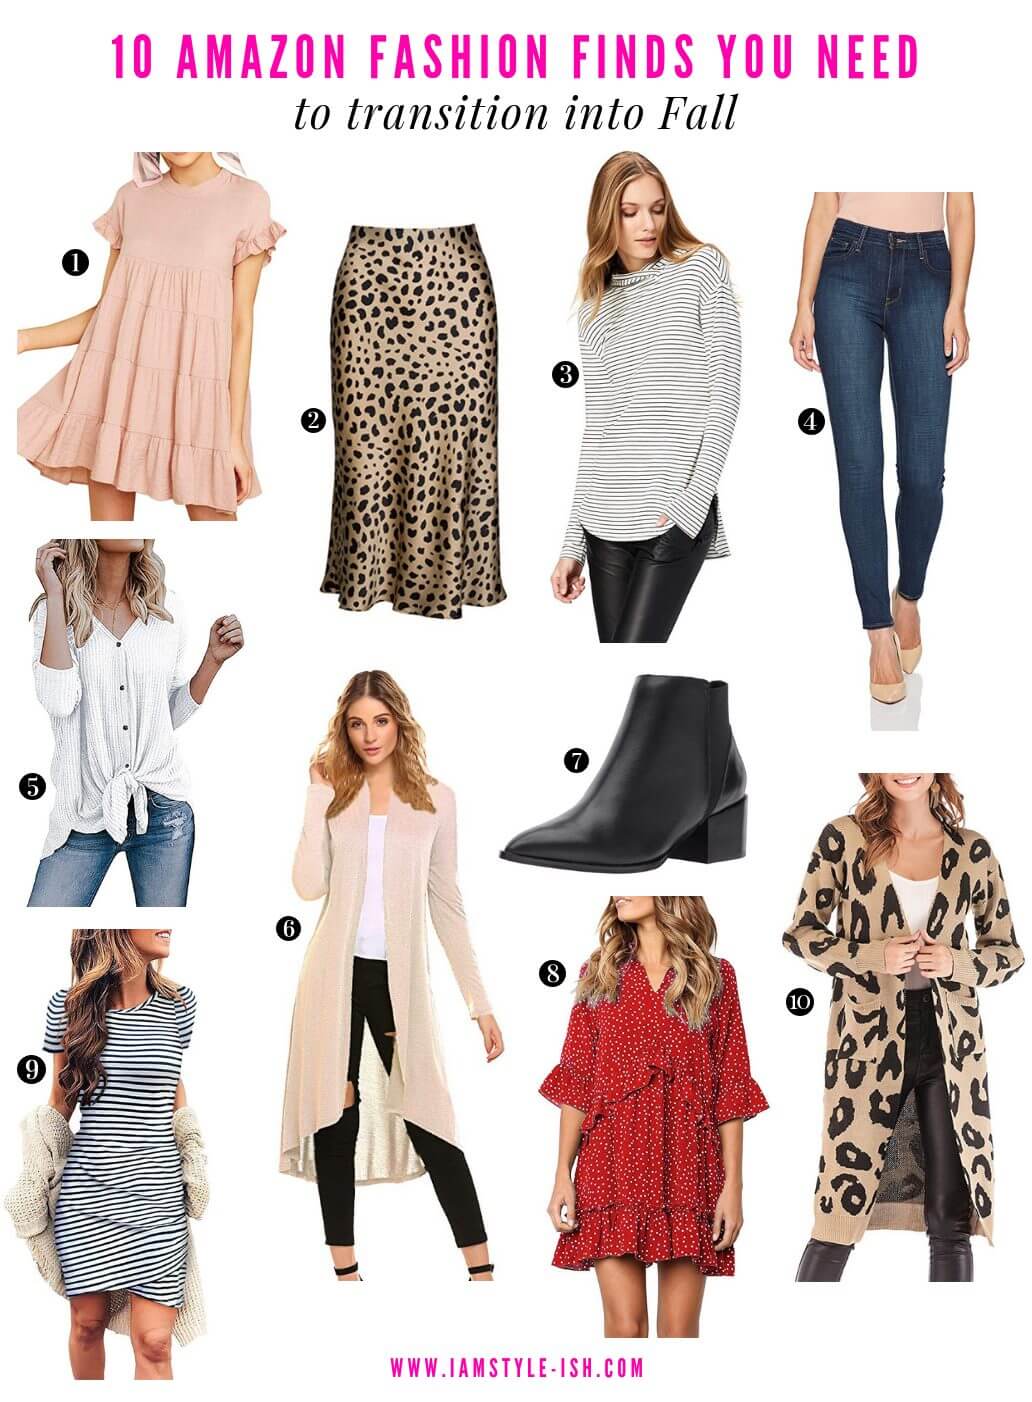 amazon fashion finds to transition into fall, transition into fall clothing items, clothing to transition into fall, fall amazon clothing finds, best fall clothing from amazon